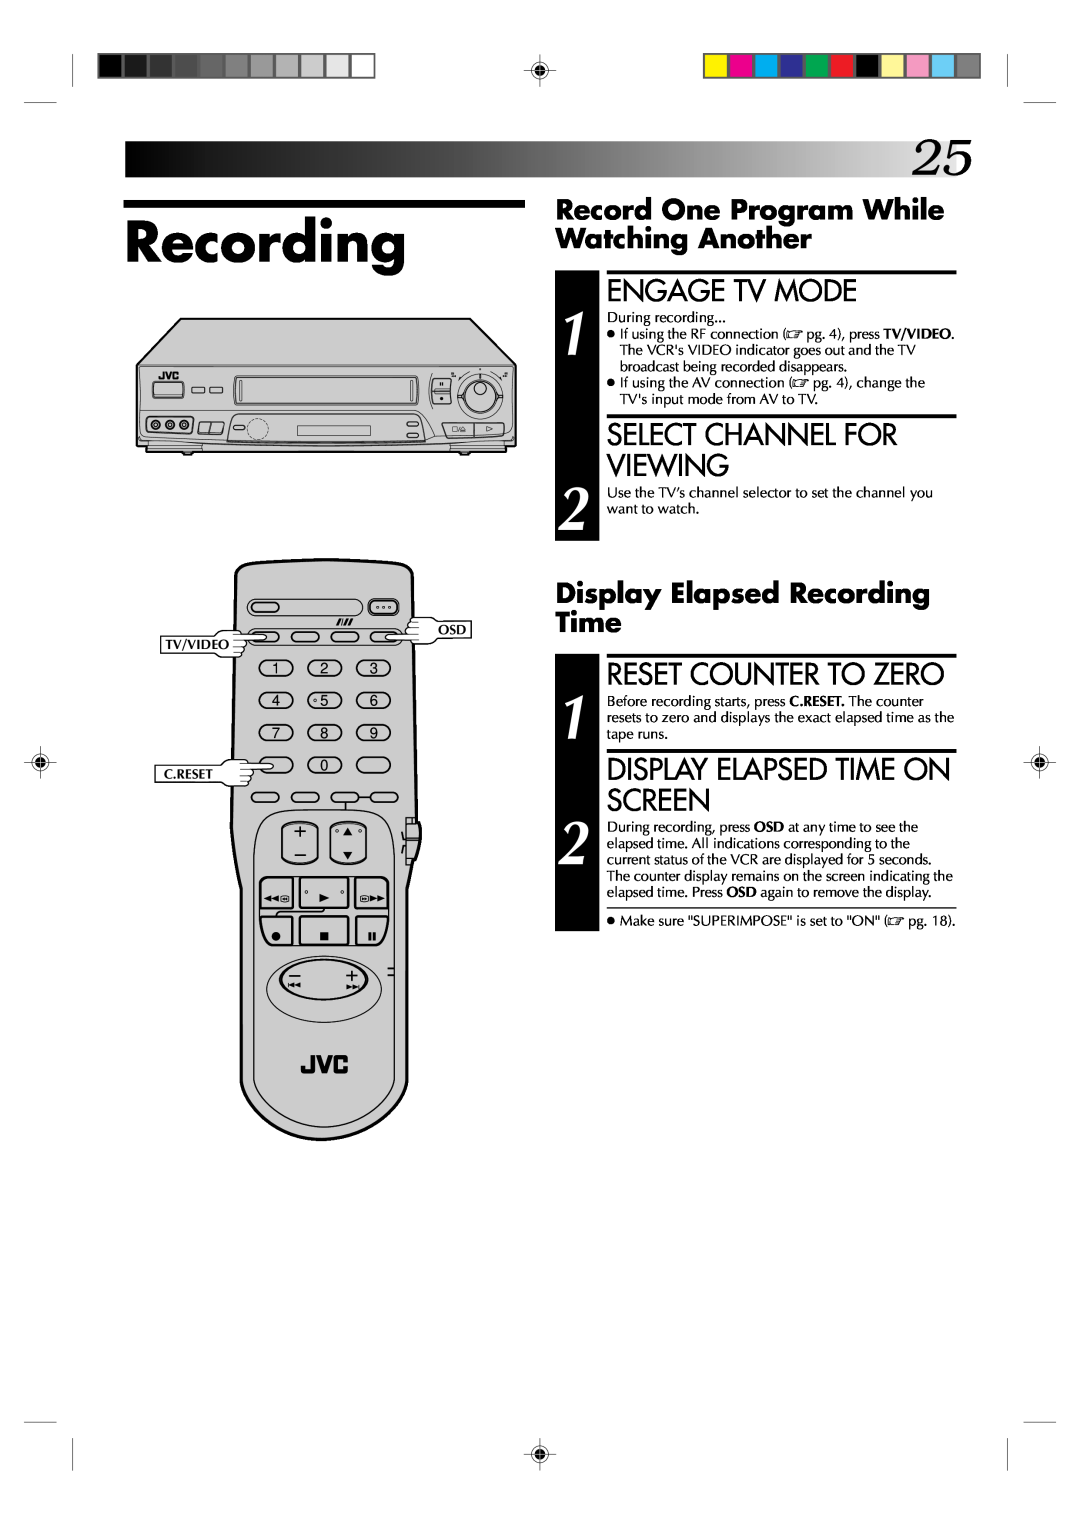 JVC HR-J631T Recording, Engage Tv Mode, Select Channel For Viewing, Reset Counter To Zero, Display Elapsed Time On Screen 